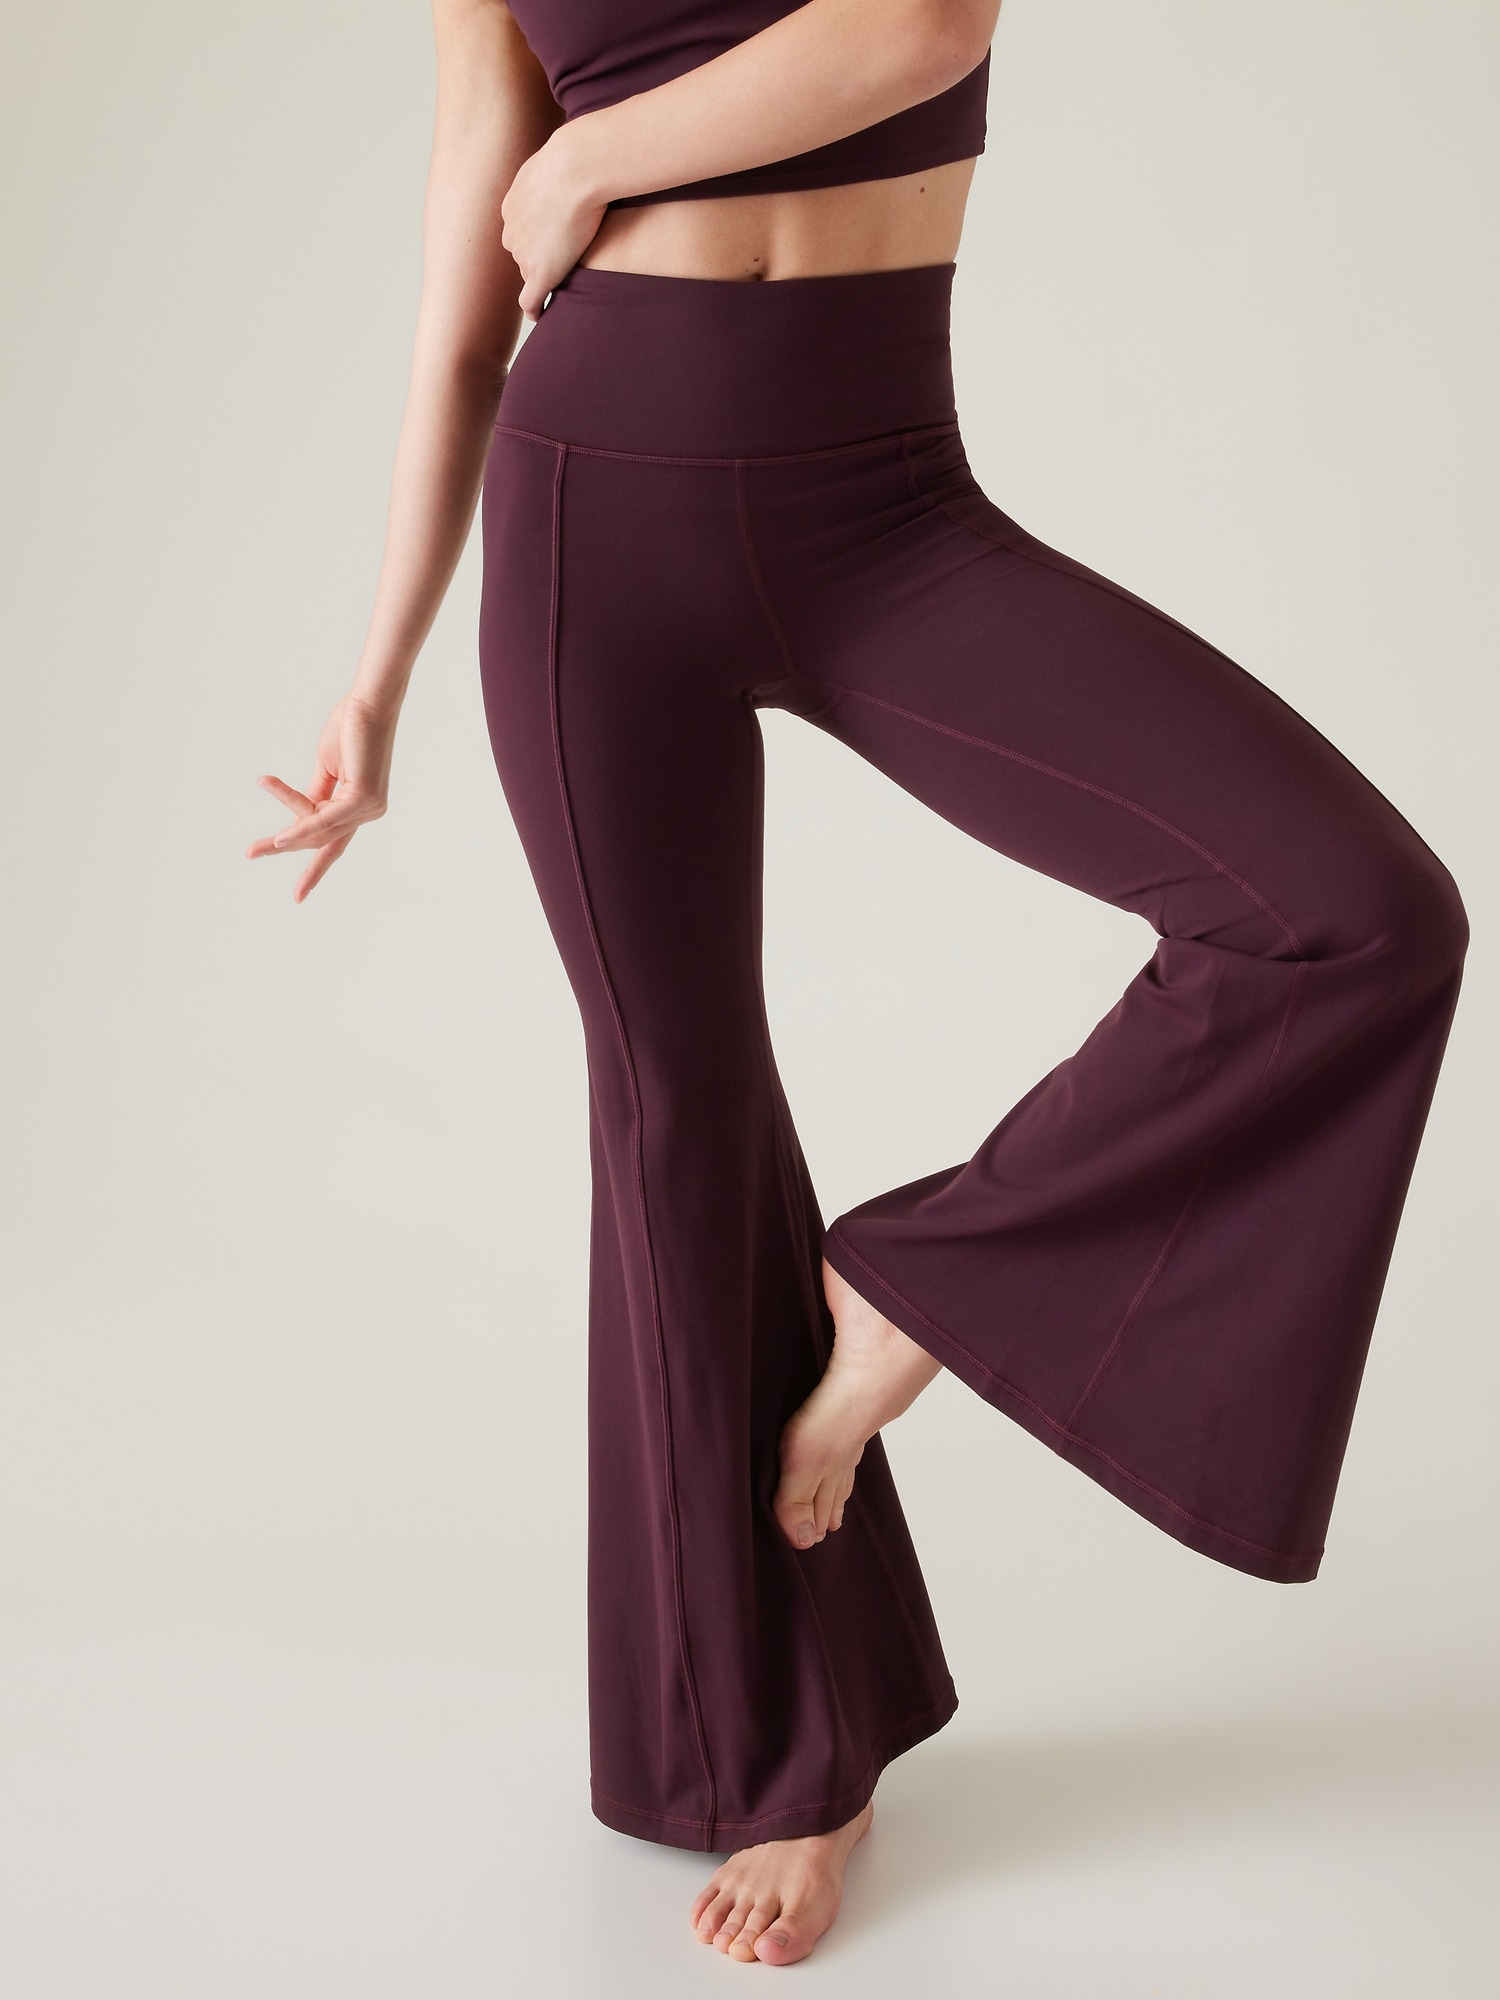 Athleta Elation Flare Pant Size XS - $26 (73% Off Retail) - From